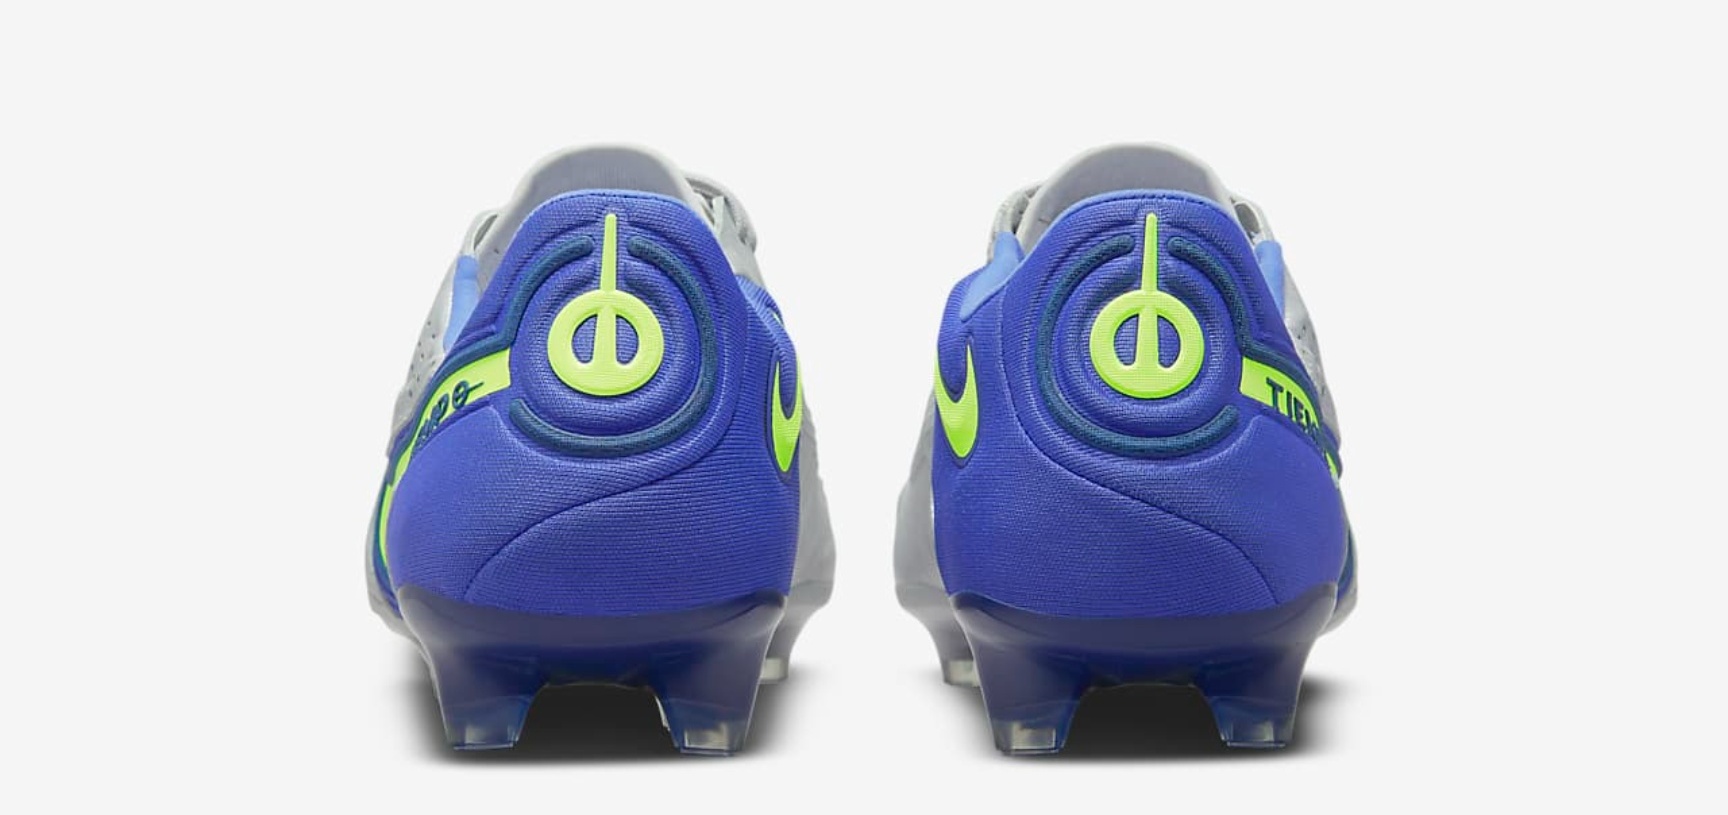 There is a trend domestic Imperative Kasper Schmeichel Football Boots